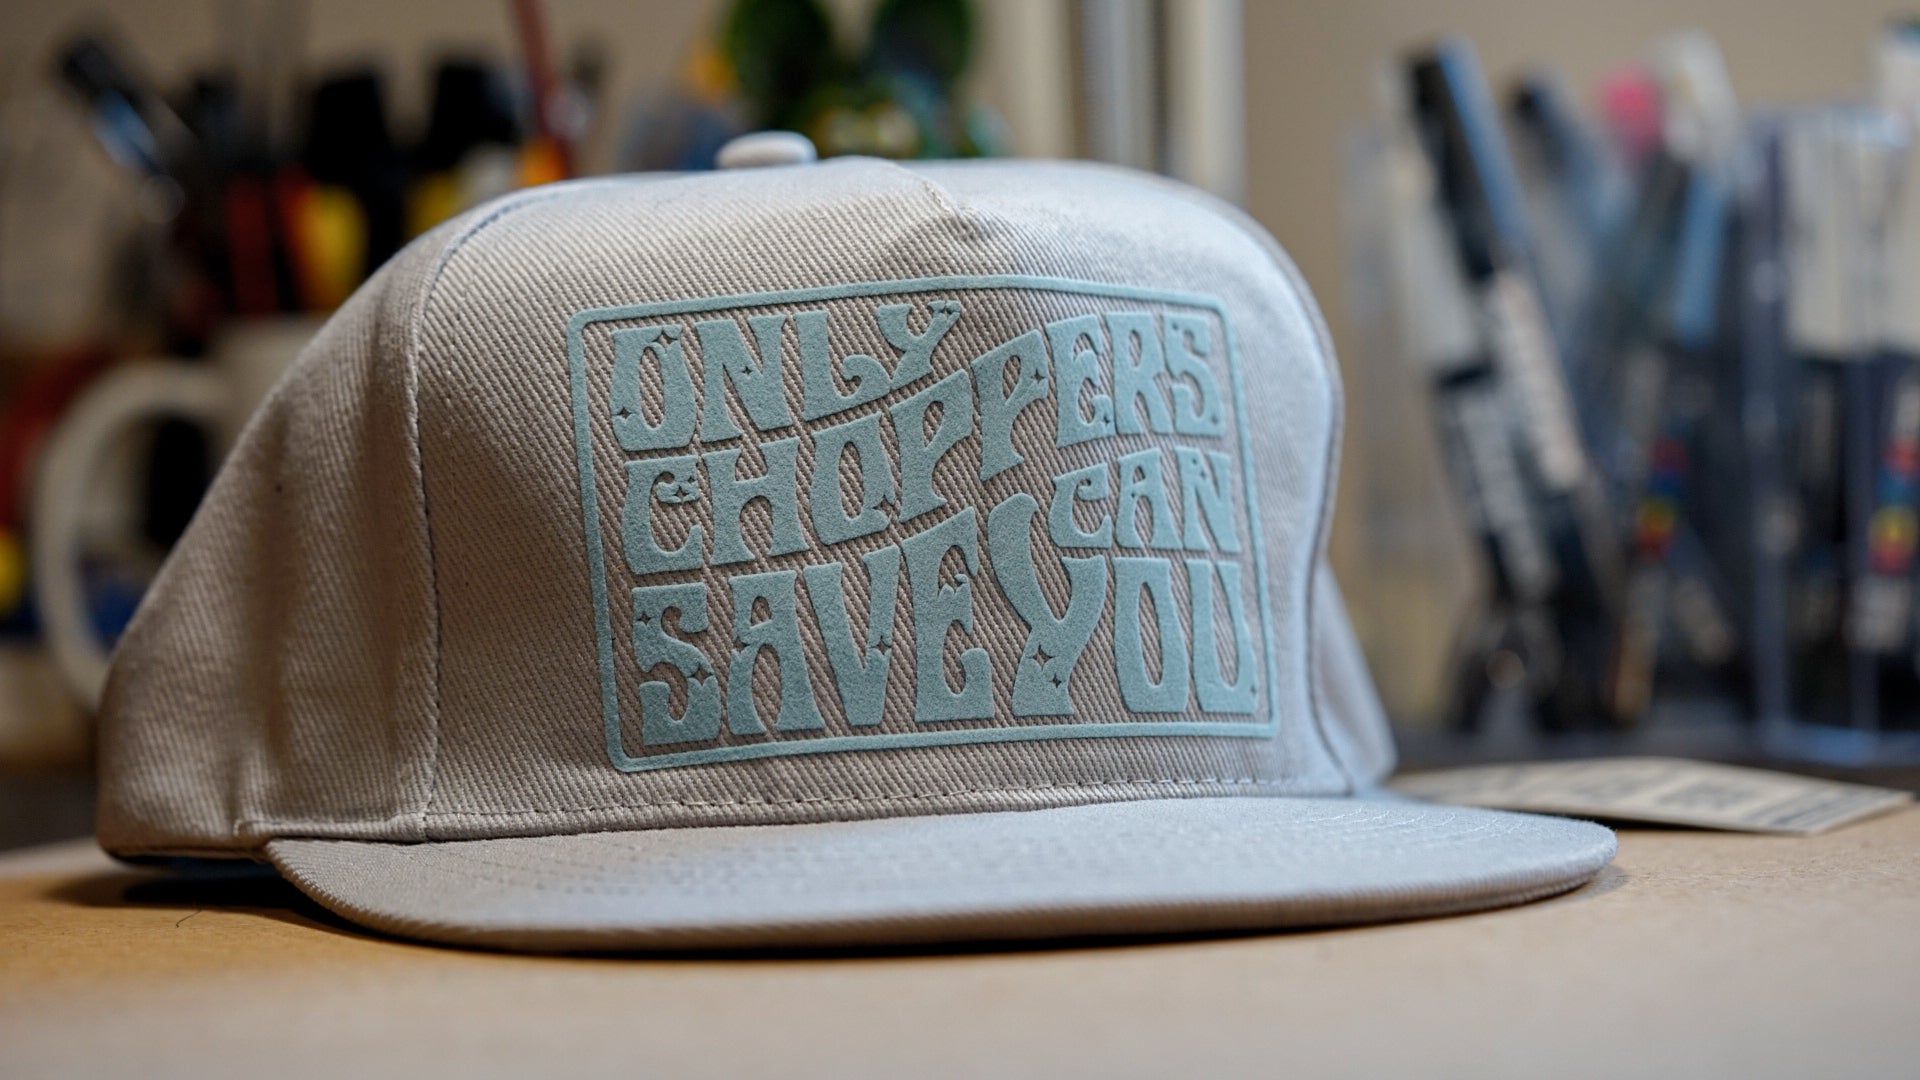 Only Choppers Can Save You - snapback